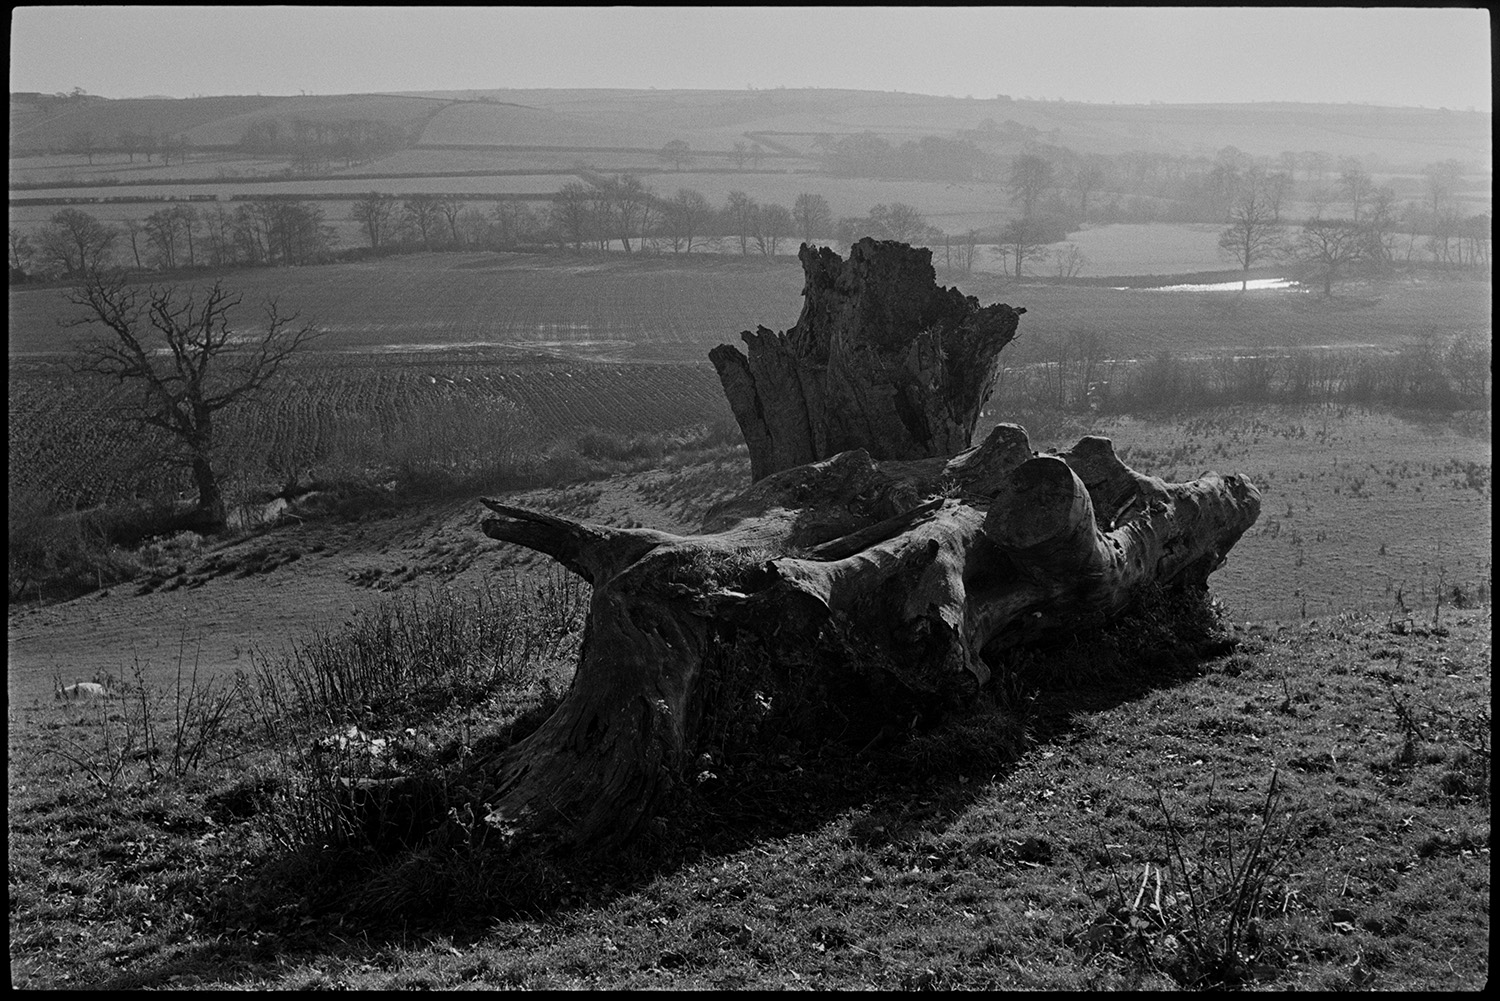 Large trees in field with sheep, abandoned car under fir tree, early morning, huge stump.
[A large tree stump lying in a field at Brushford Barton. In the background is a landscape of fields, trees, hedgerows and a river valley.]